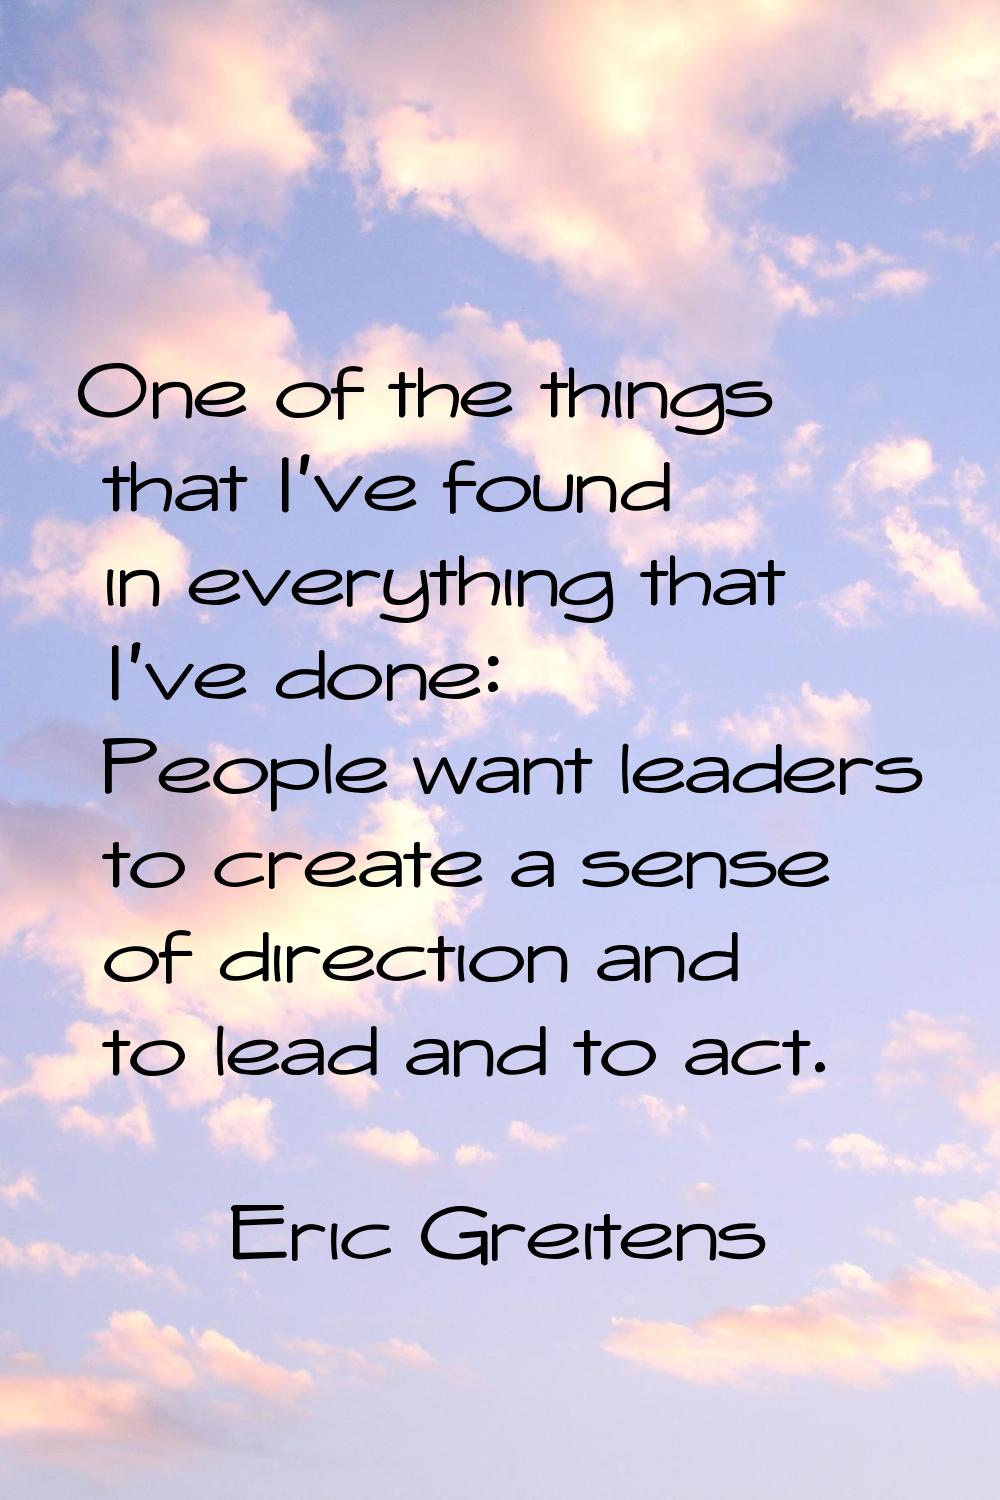 One of the things that I've found in everything that I've done: People want leaders to create a sen